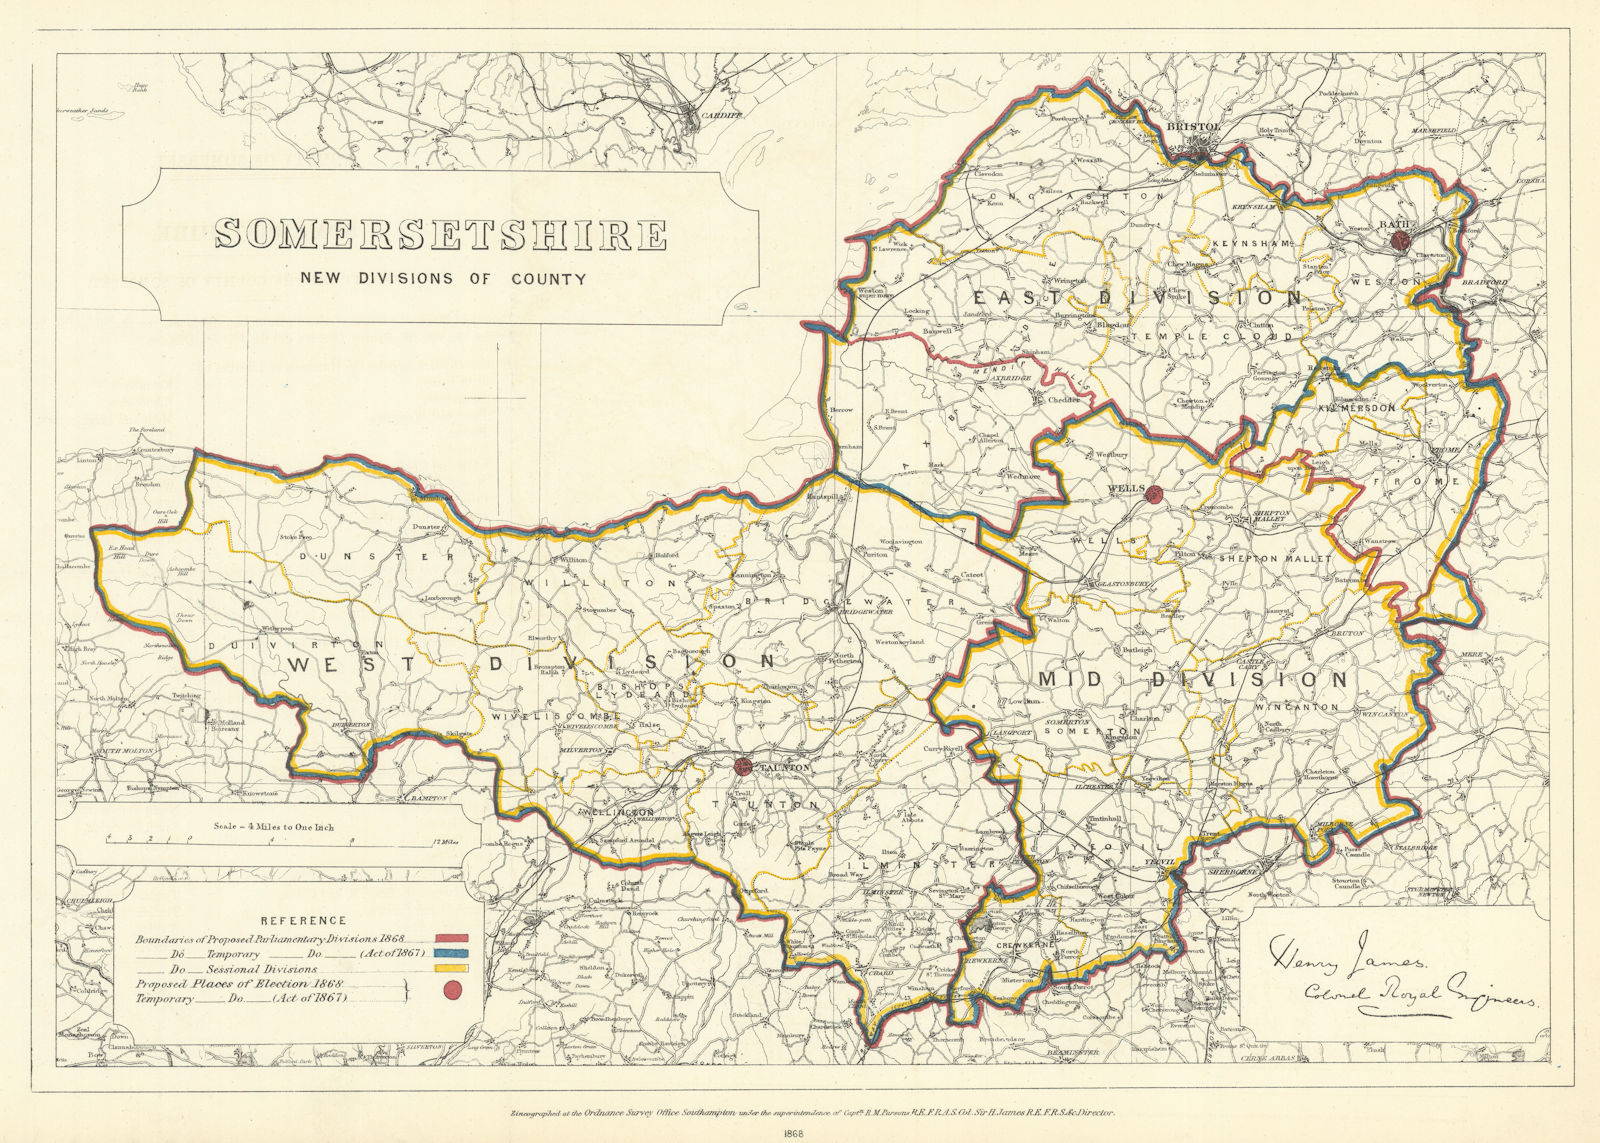 Somersetshire (New divisions of County). JAMES. Boundary Commission 1868 map